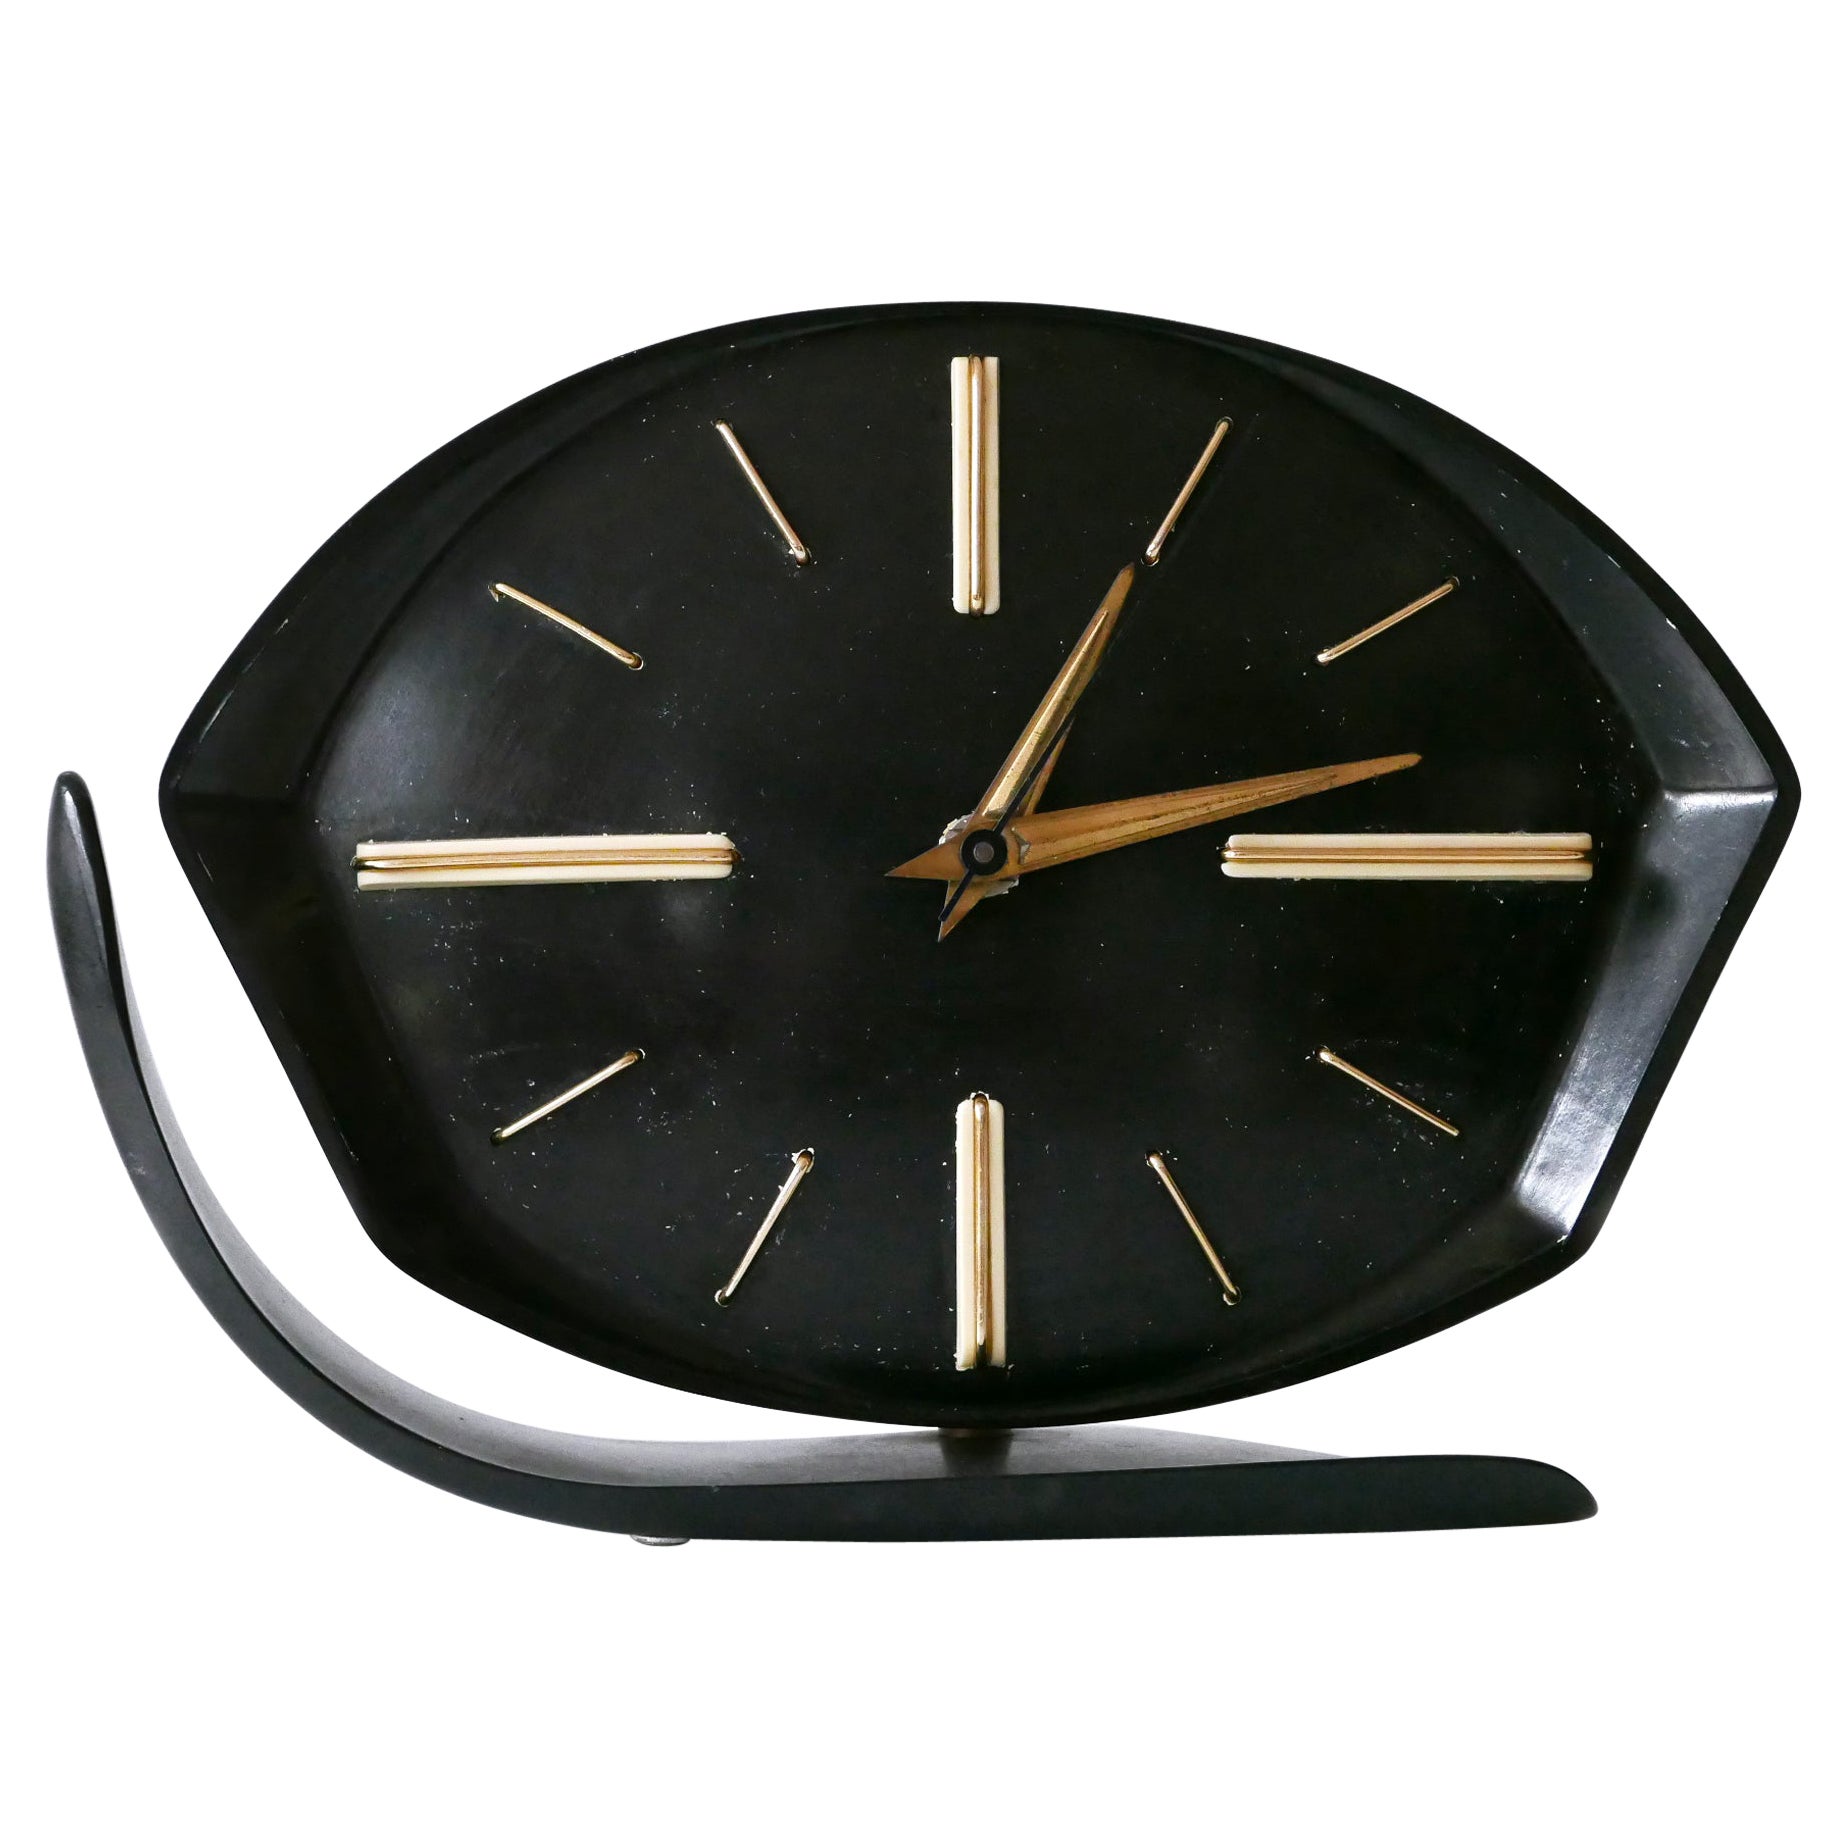 Rare and Lovely Mid-Century Modern Bakelite Table or Wall Clock by PRIM 1950s For Sale